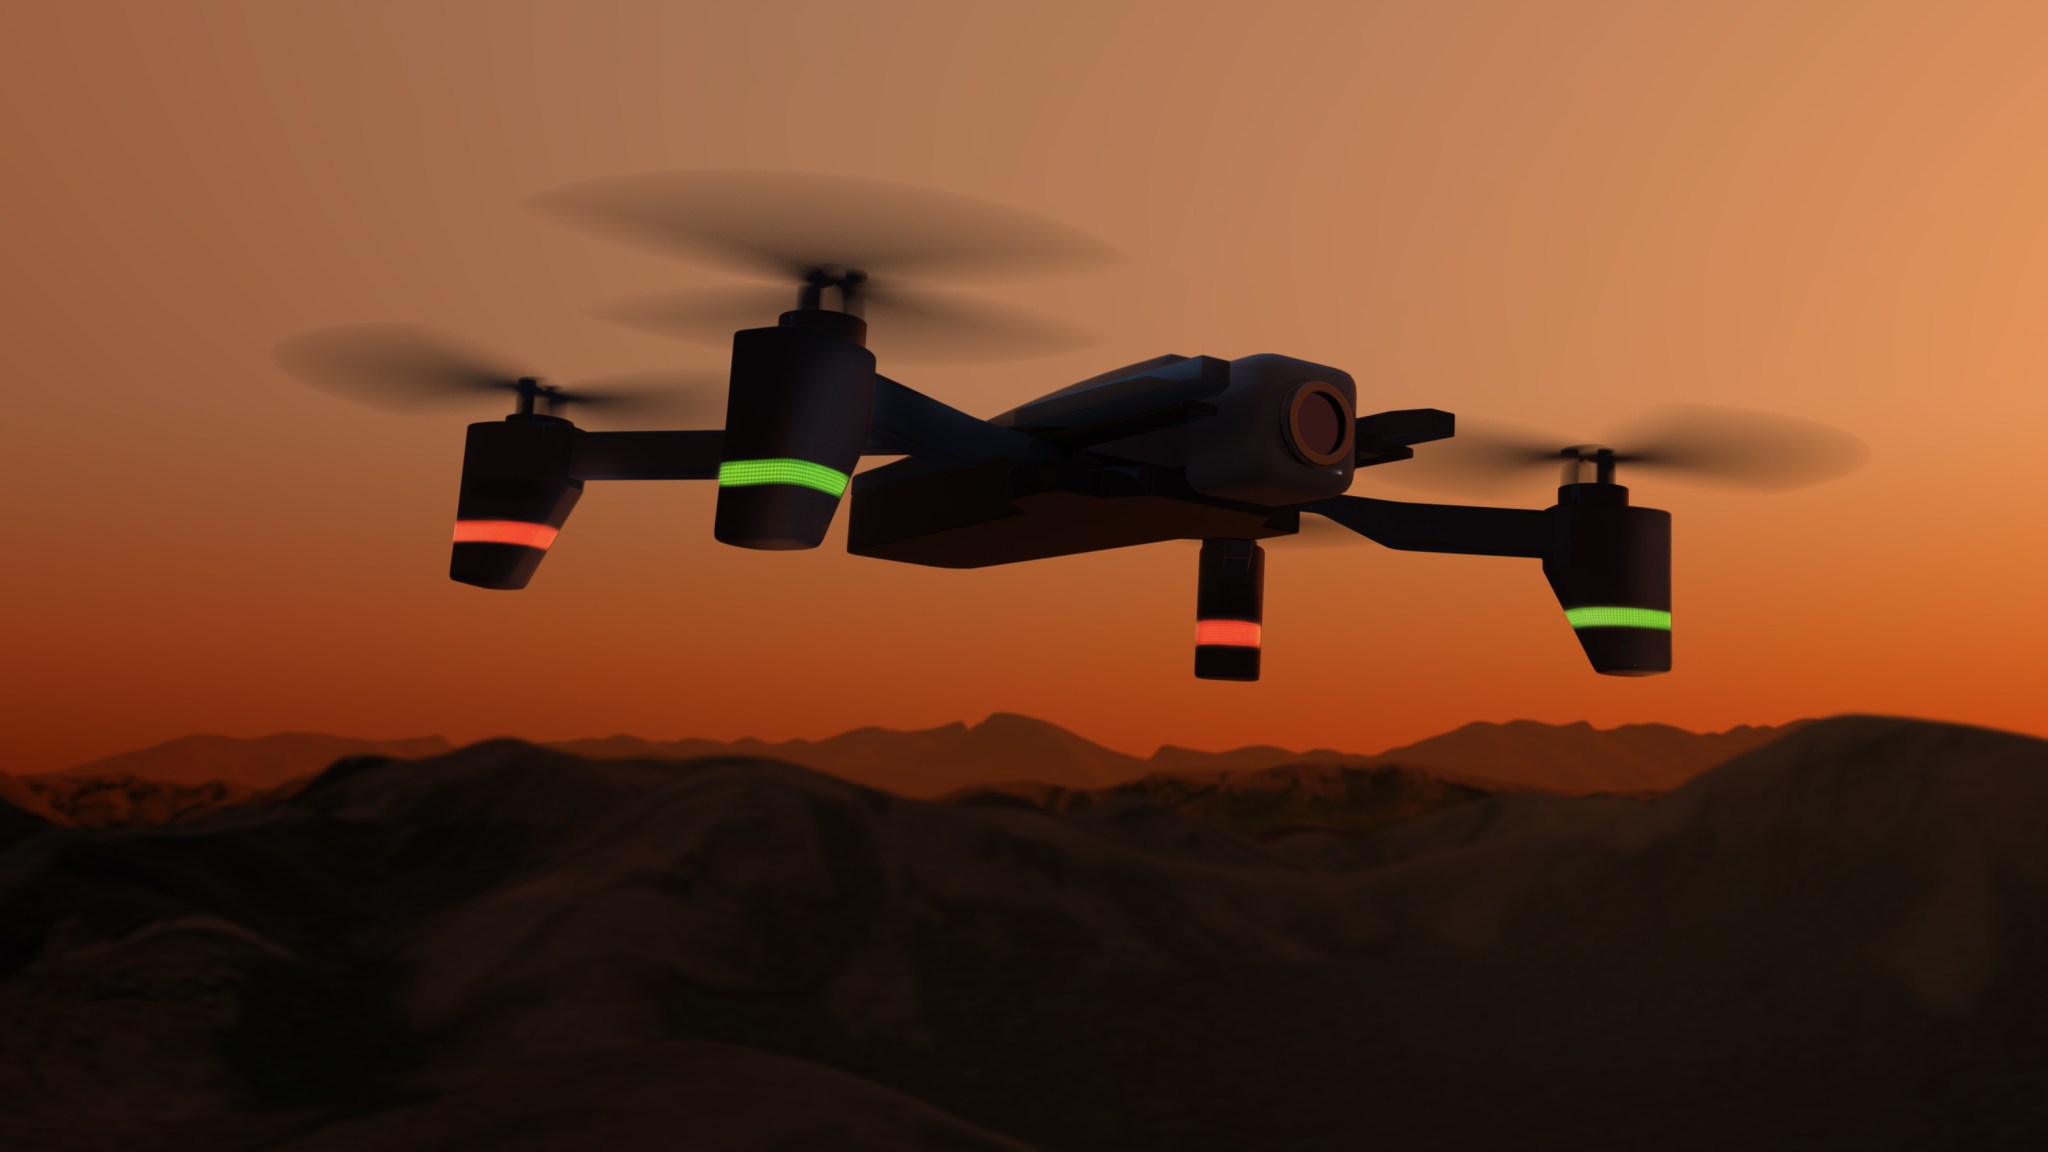 Wildfire Drone flying through the air while the sun is setting in the background.